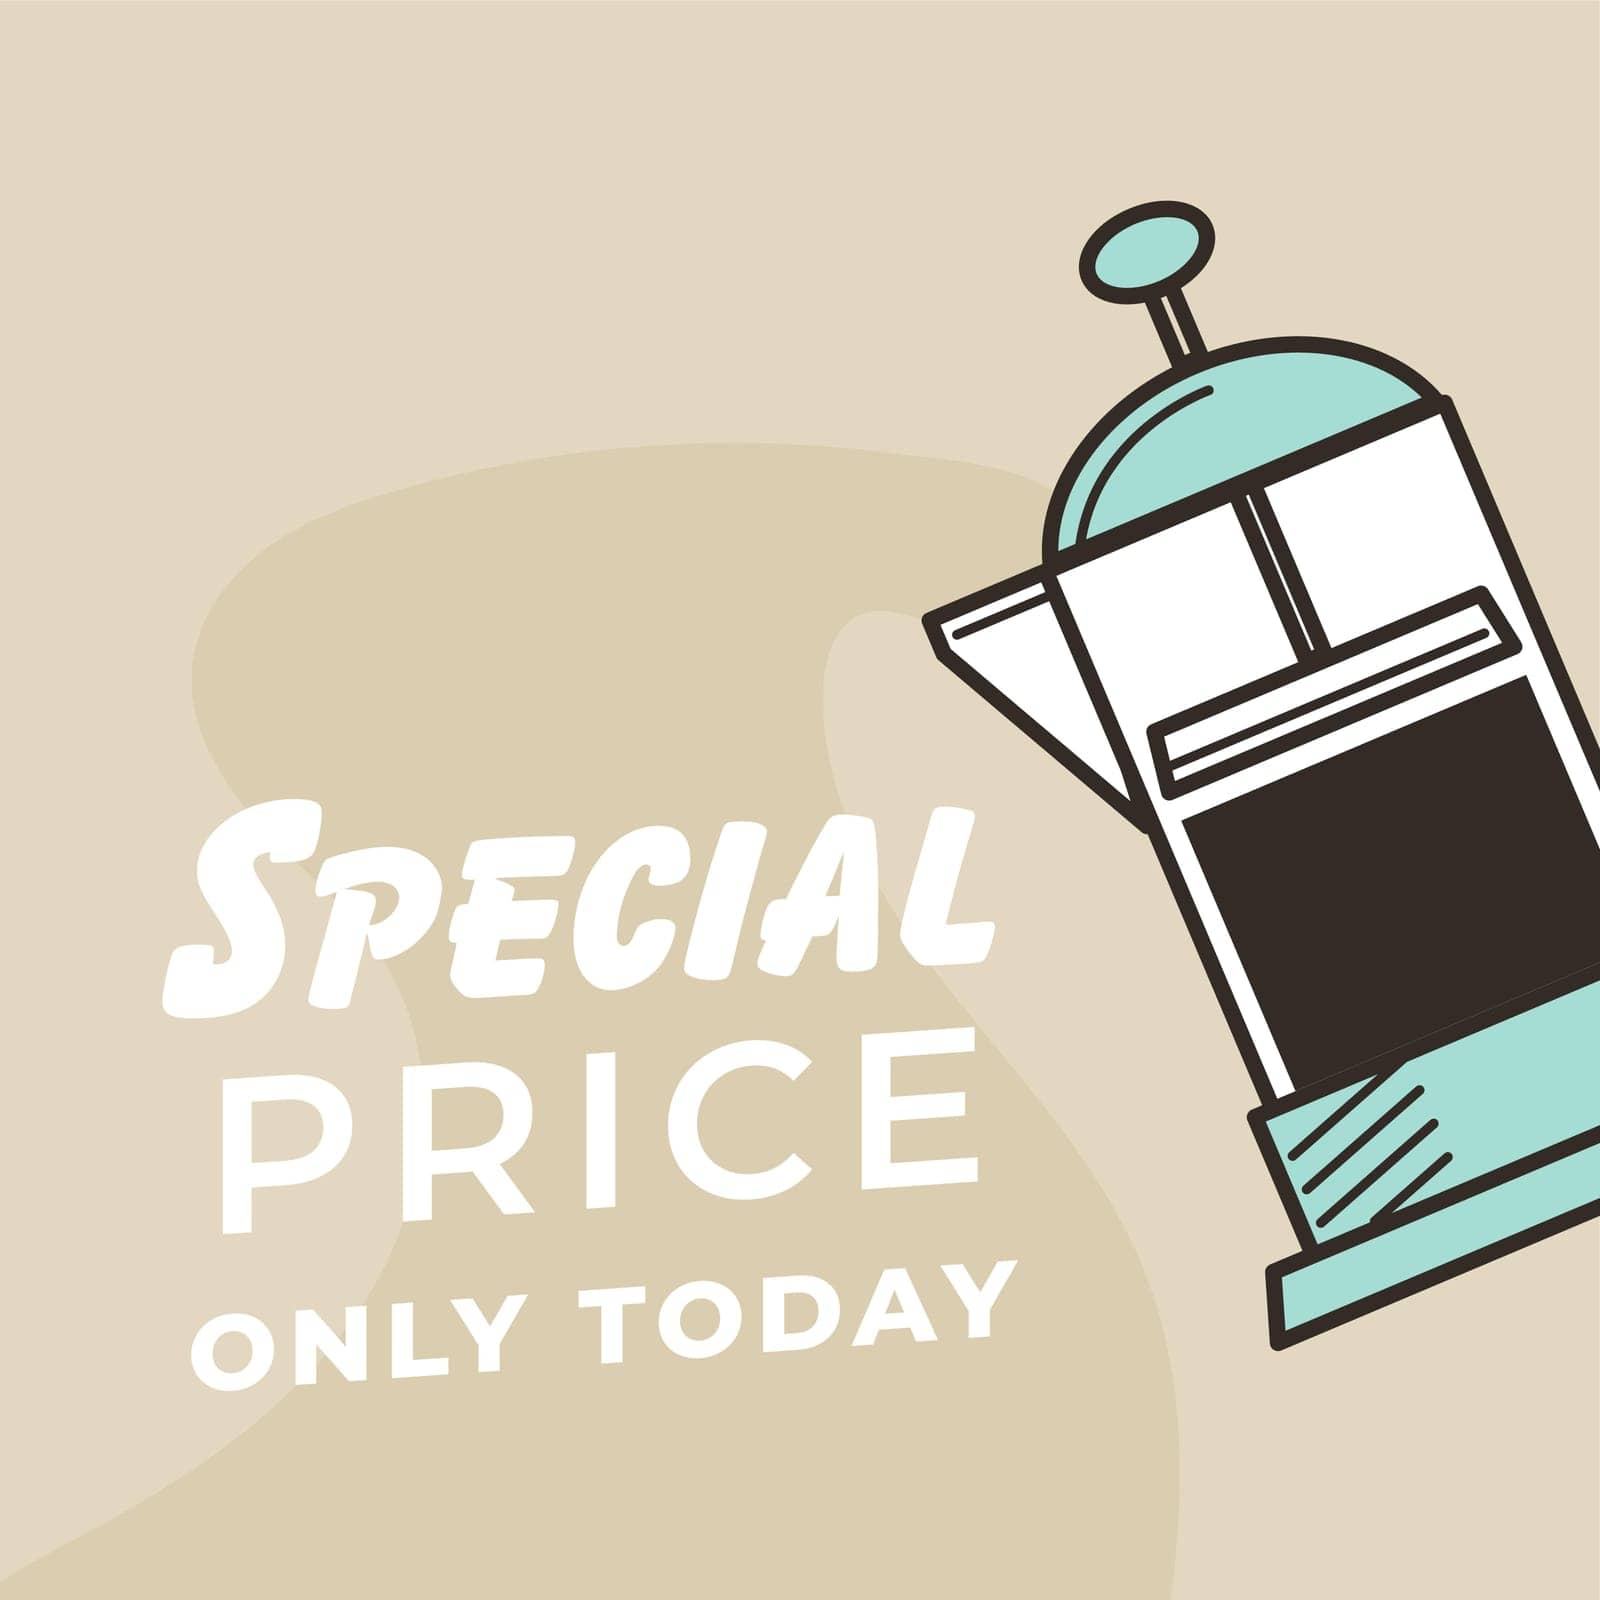 Special price only today for French press coffee by Sonulkaster